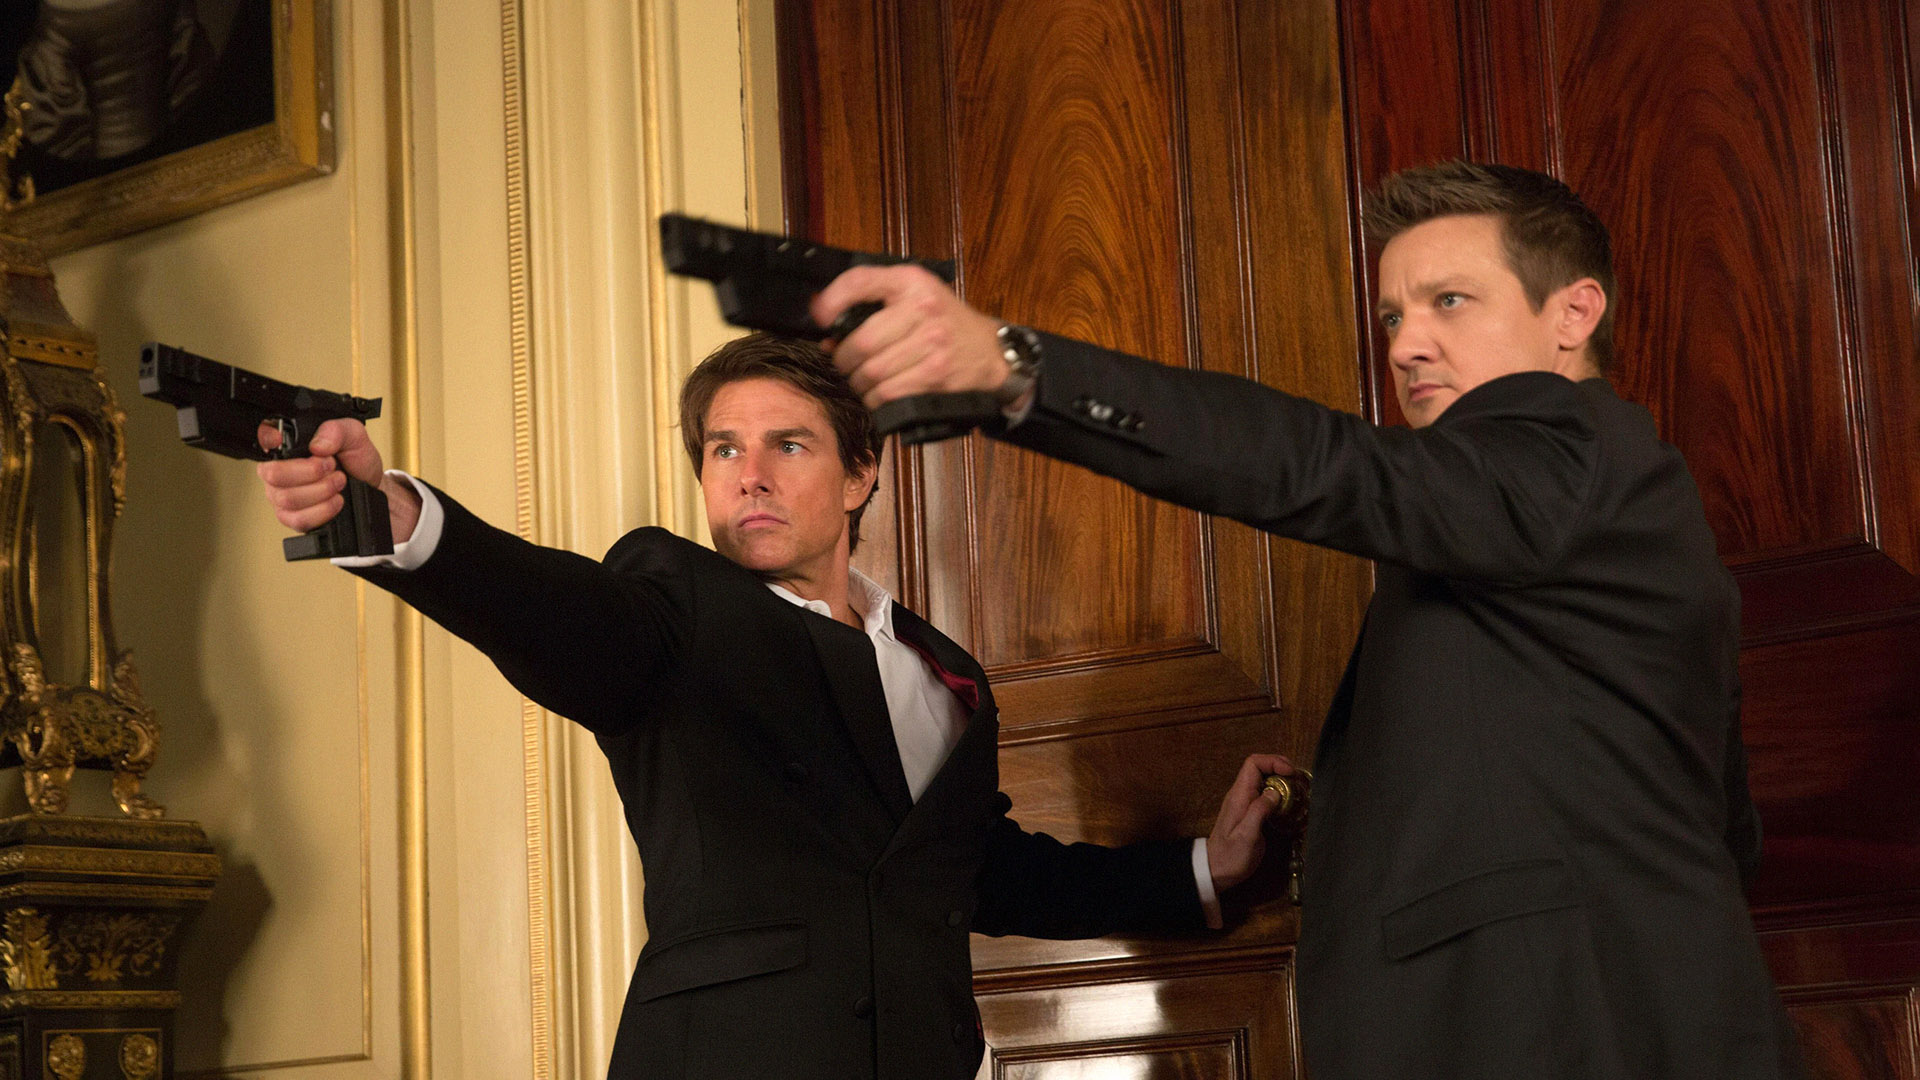 Will Jeremy Renner Return as William Brandt in Mission Impossible 7: Dead Reckoning?